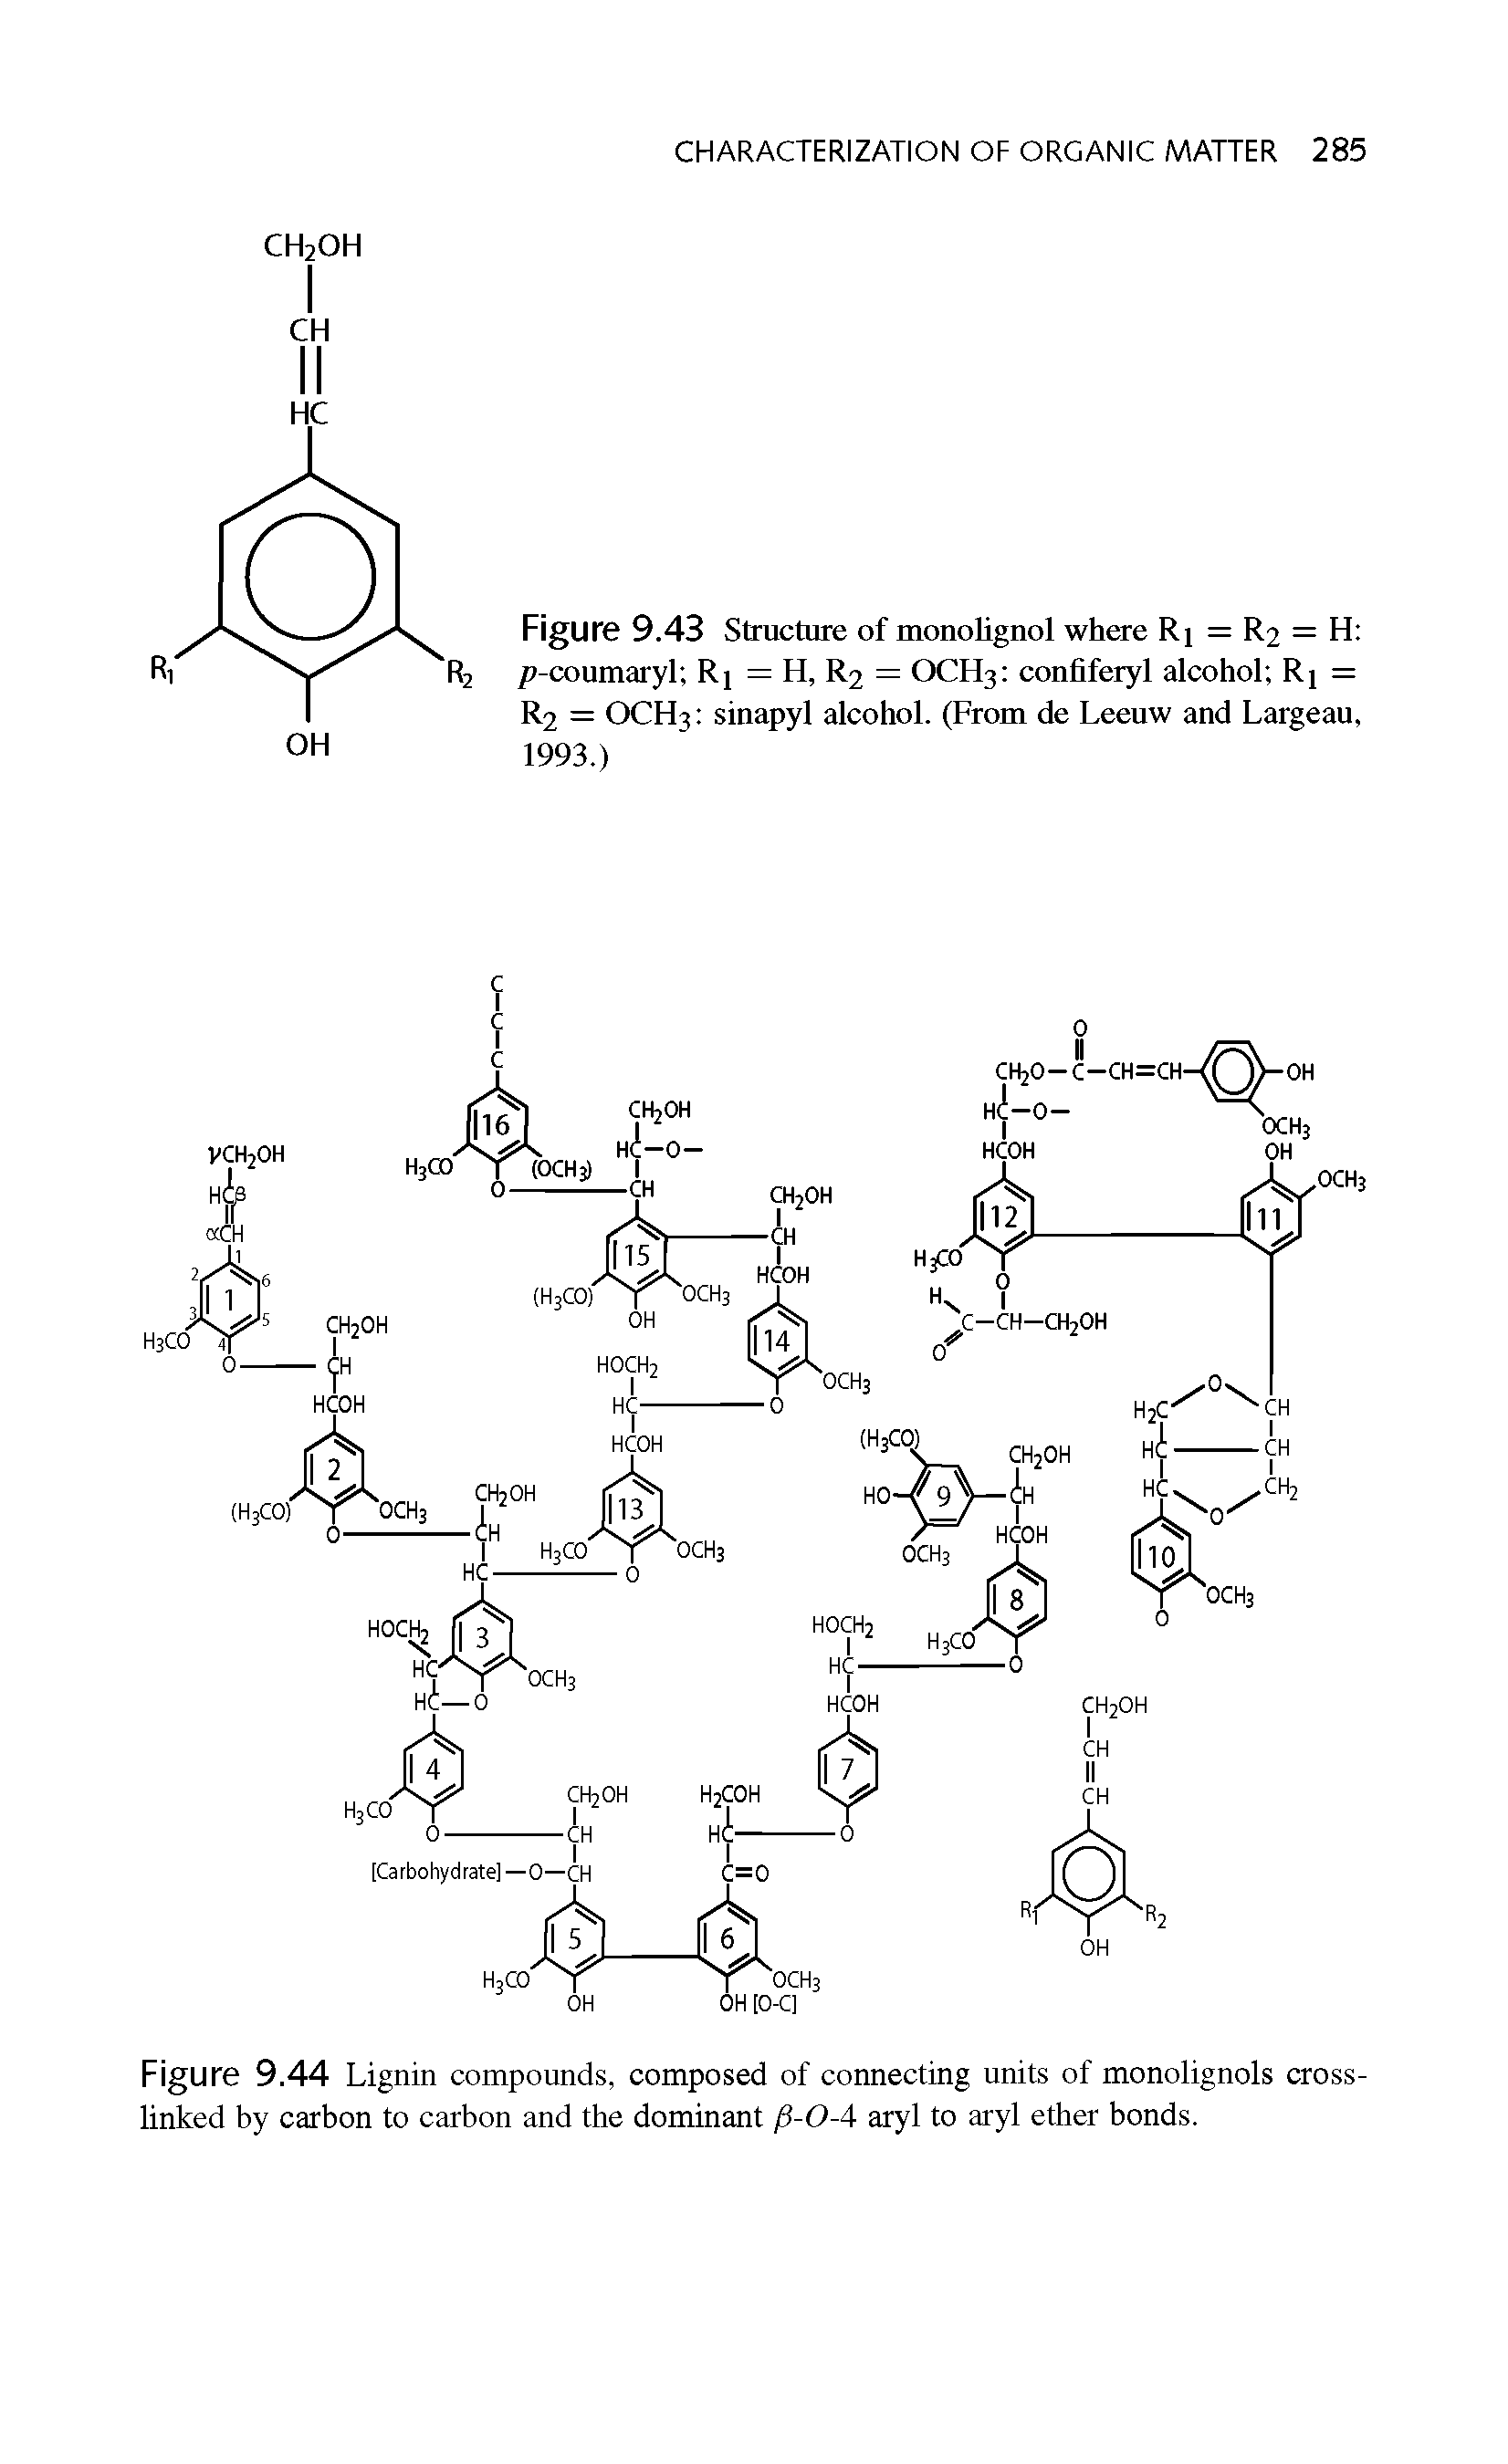 Figure 9.44 Lignin compounds, composed of connecting units of monolignols cross linked by carbon to carbon and the dominant /3-0-4 aryl to aryl ether bonds.